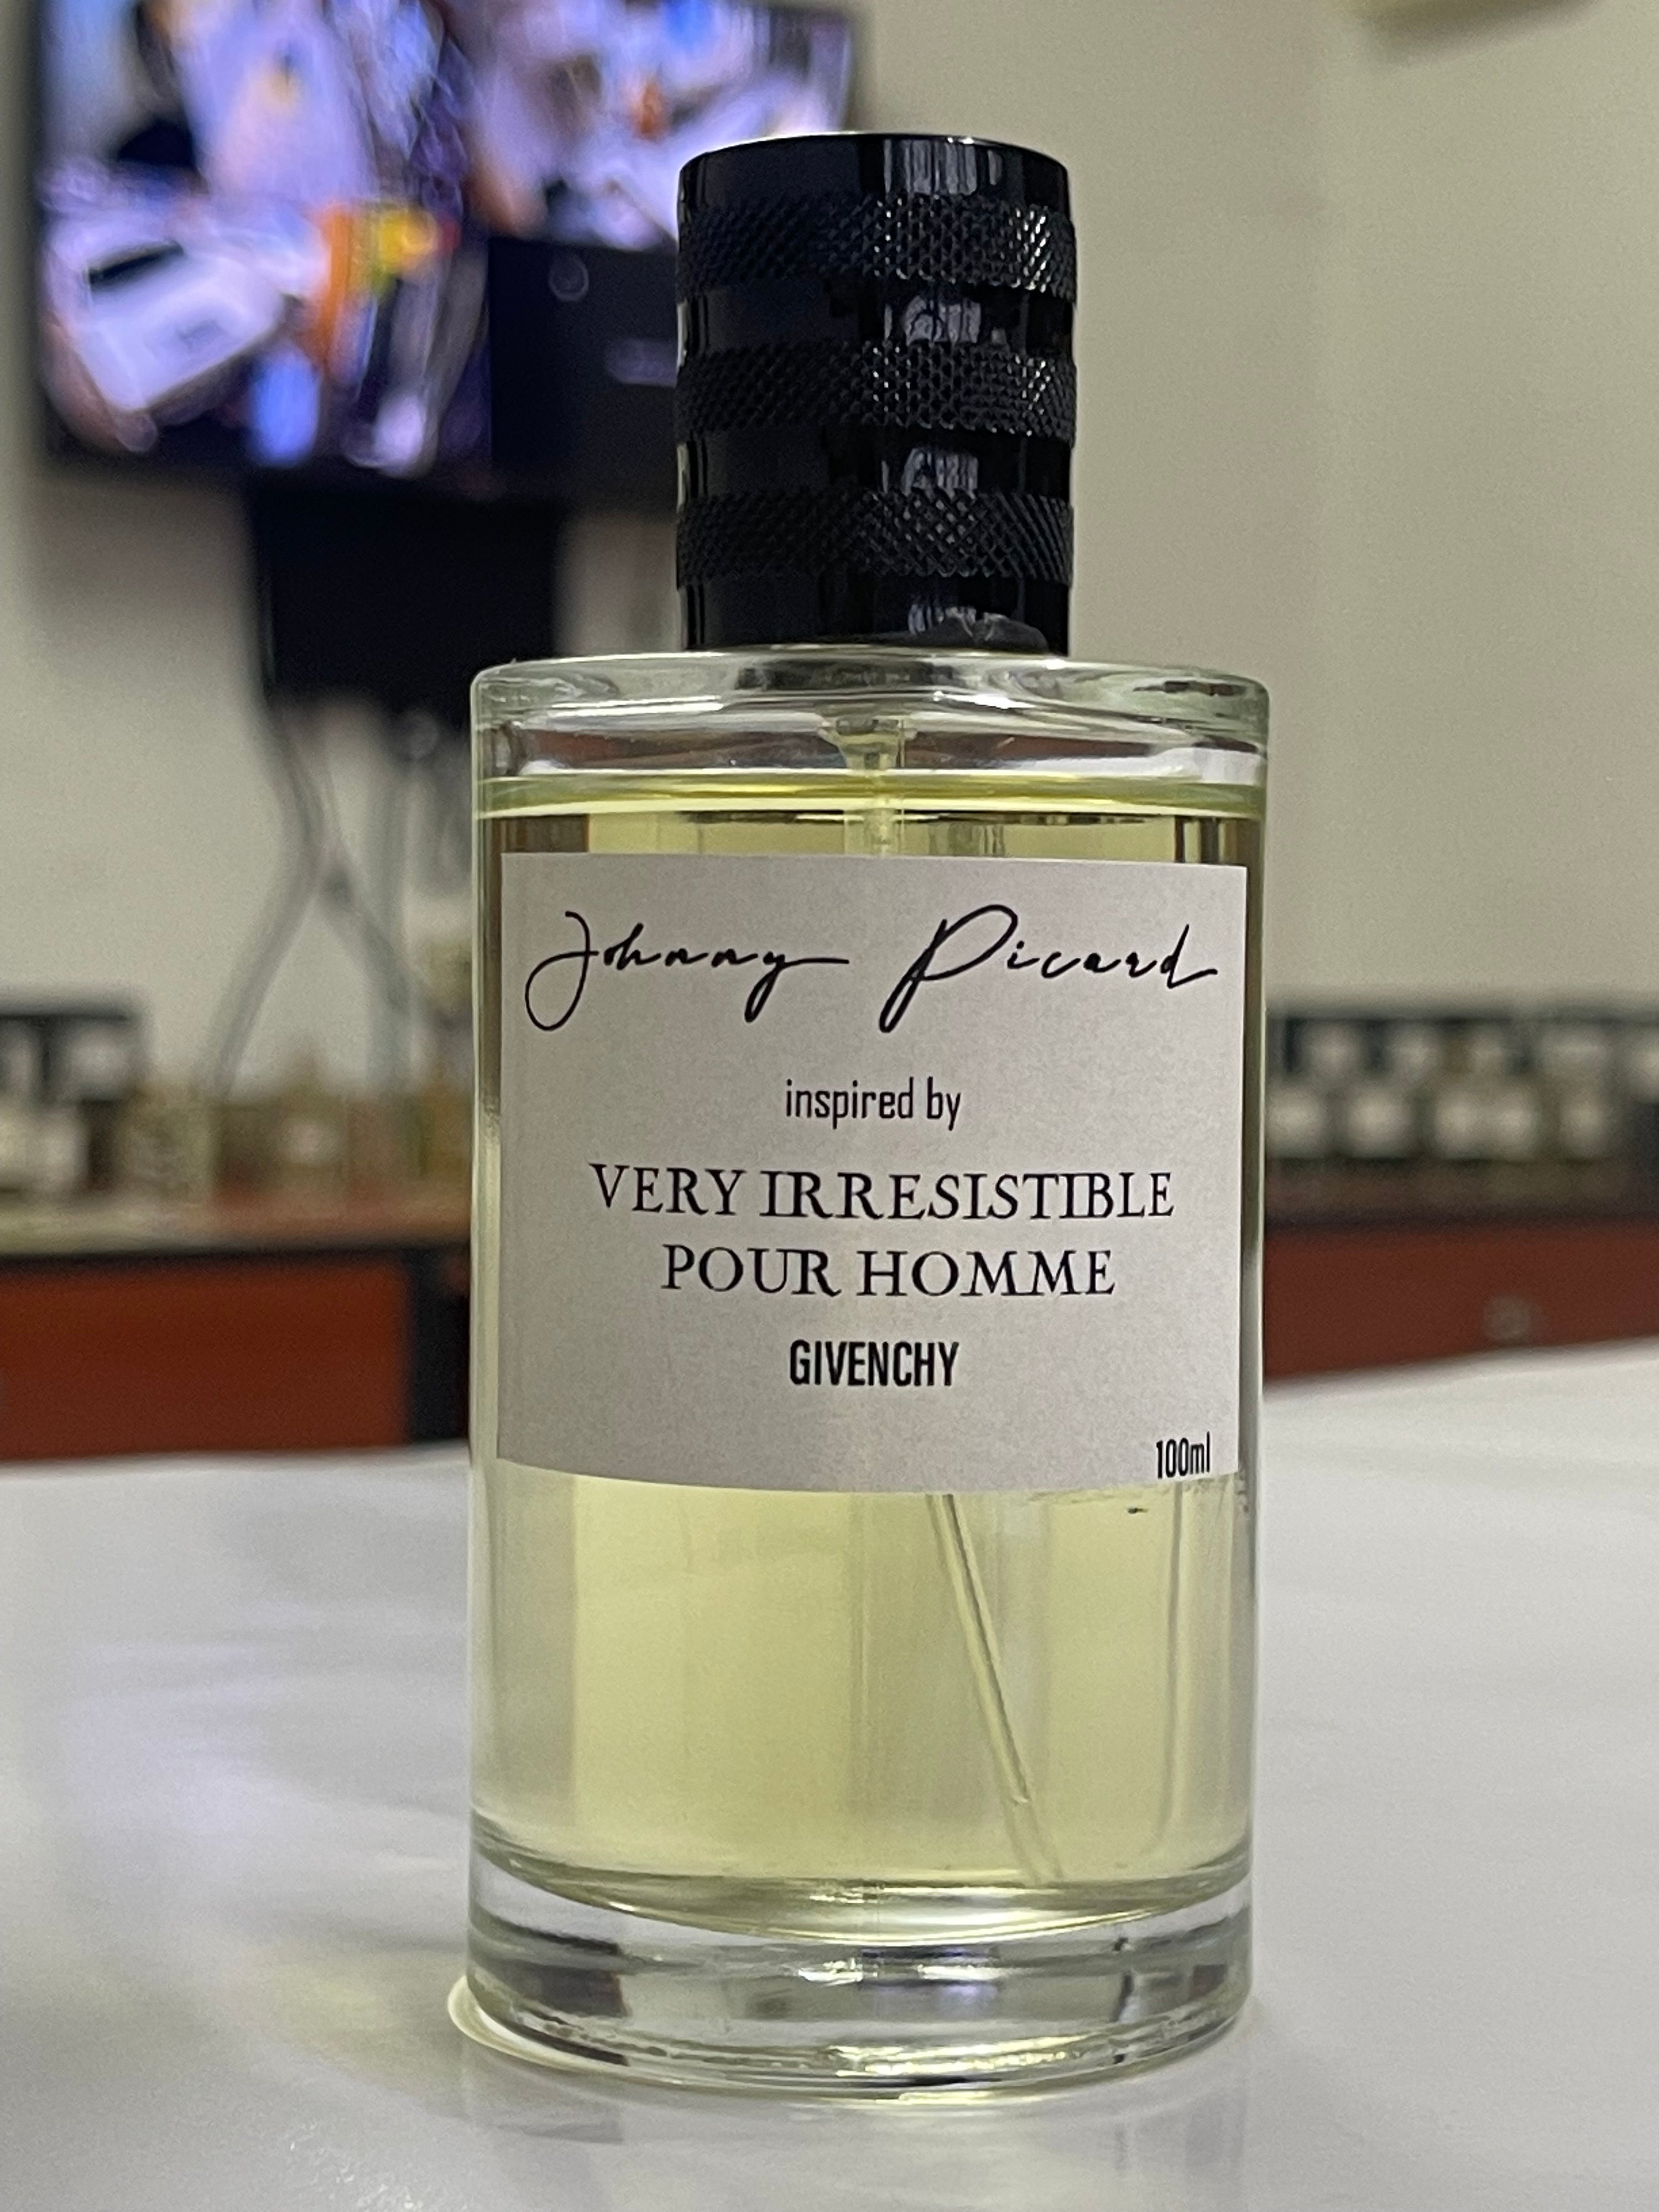 Johnny picard inspired by very irresistible pour homme GIVENCHY